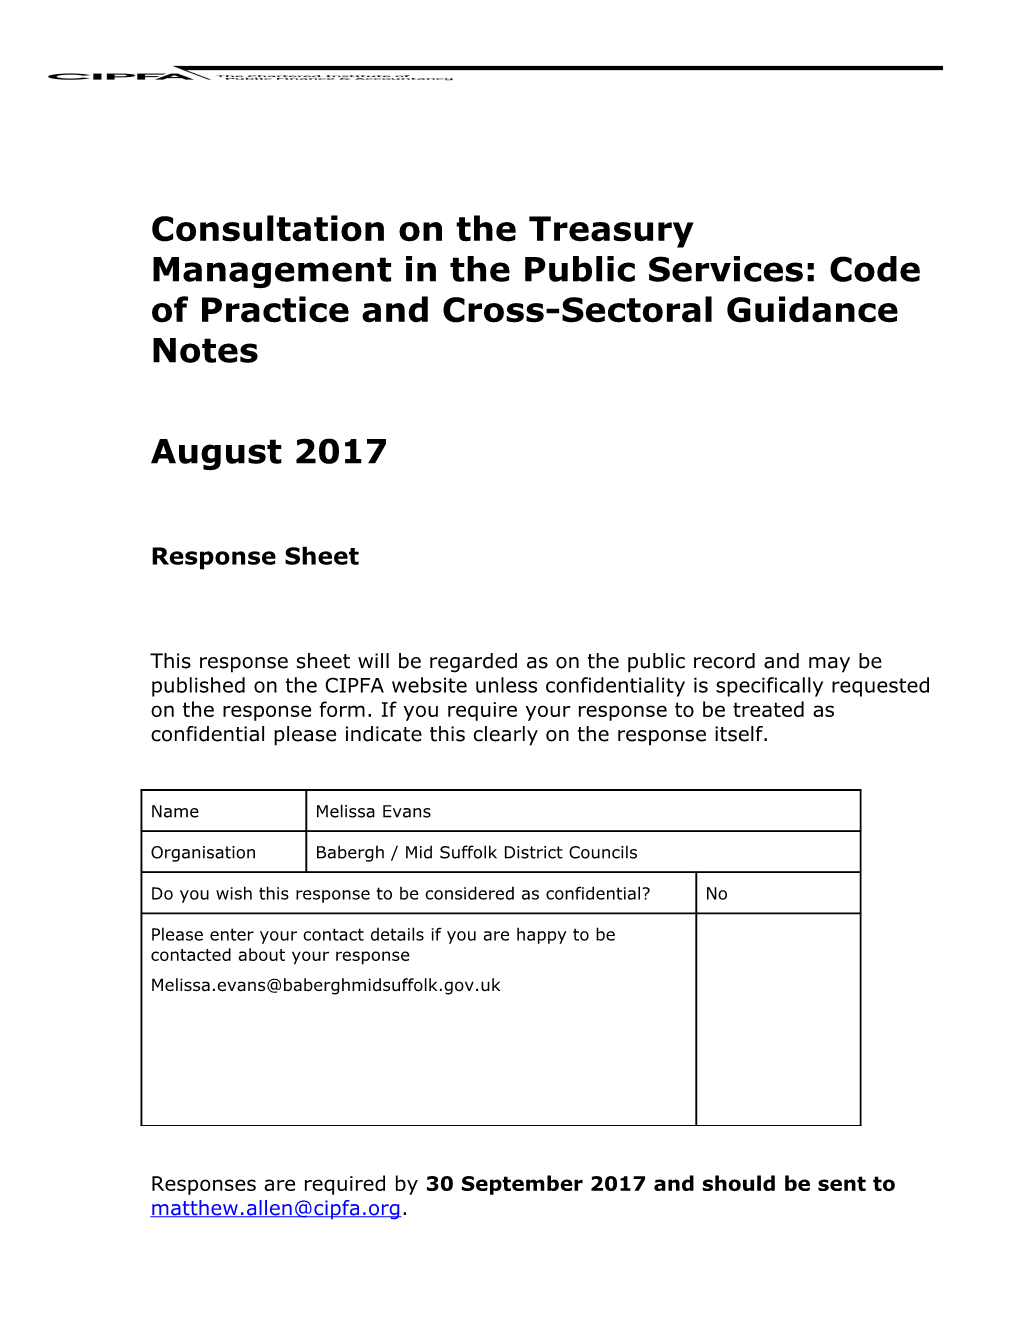 Consultation on Thetreasury Management in the Public Services: Code of Practice And